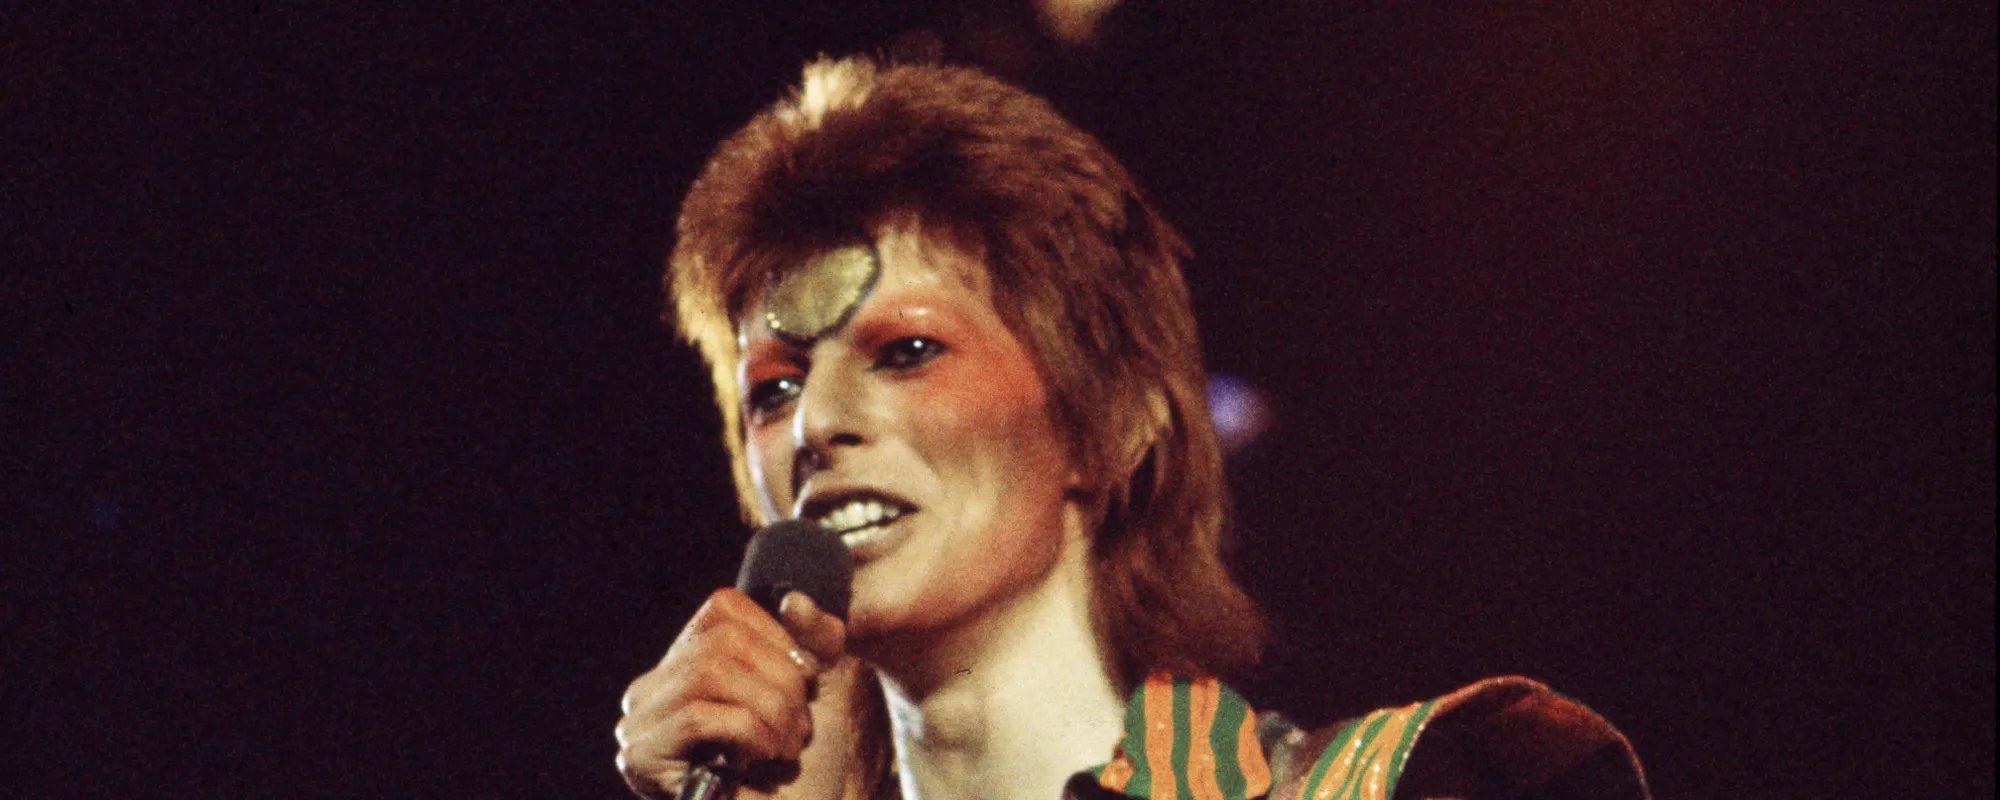 Listen To The Newly Released Version of David Bowie’s “Starman (Top Of The Pops Version – 2022 Mix)”